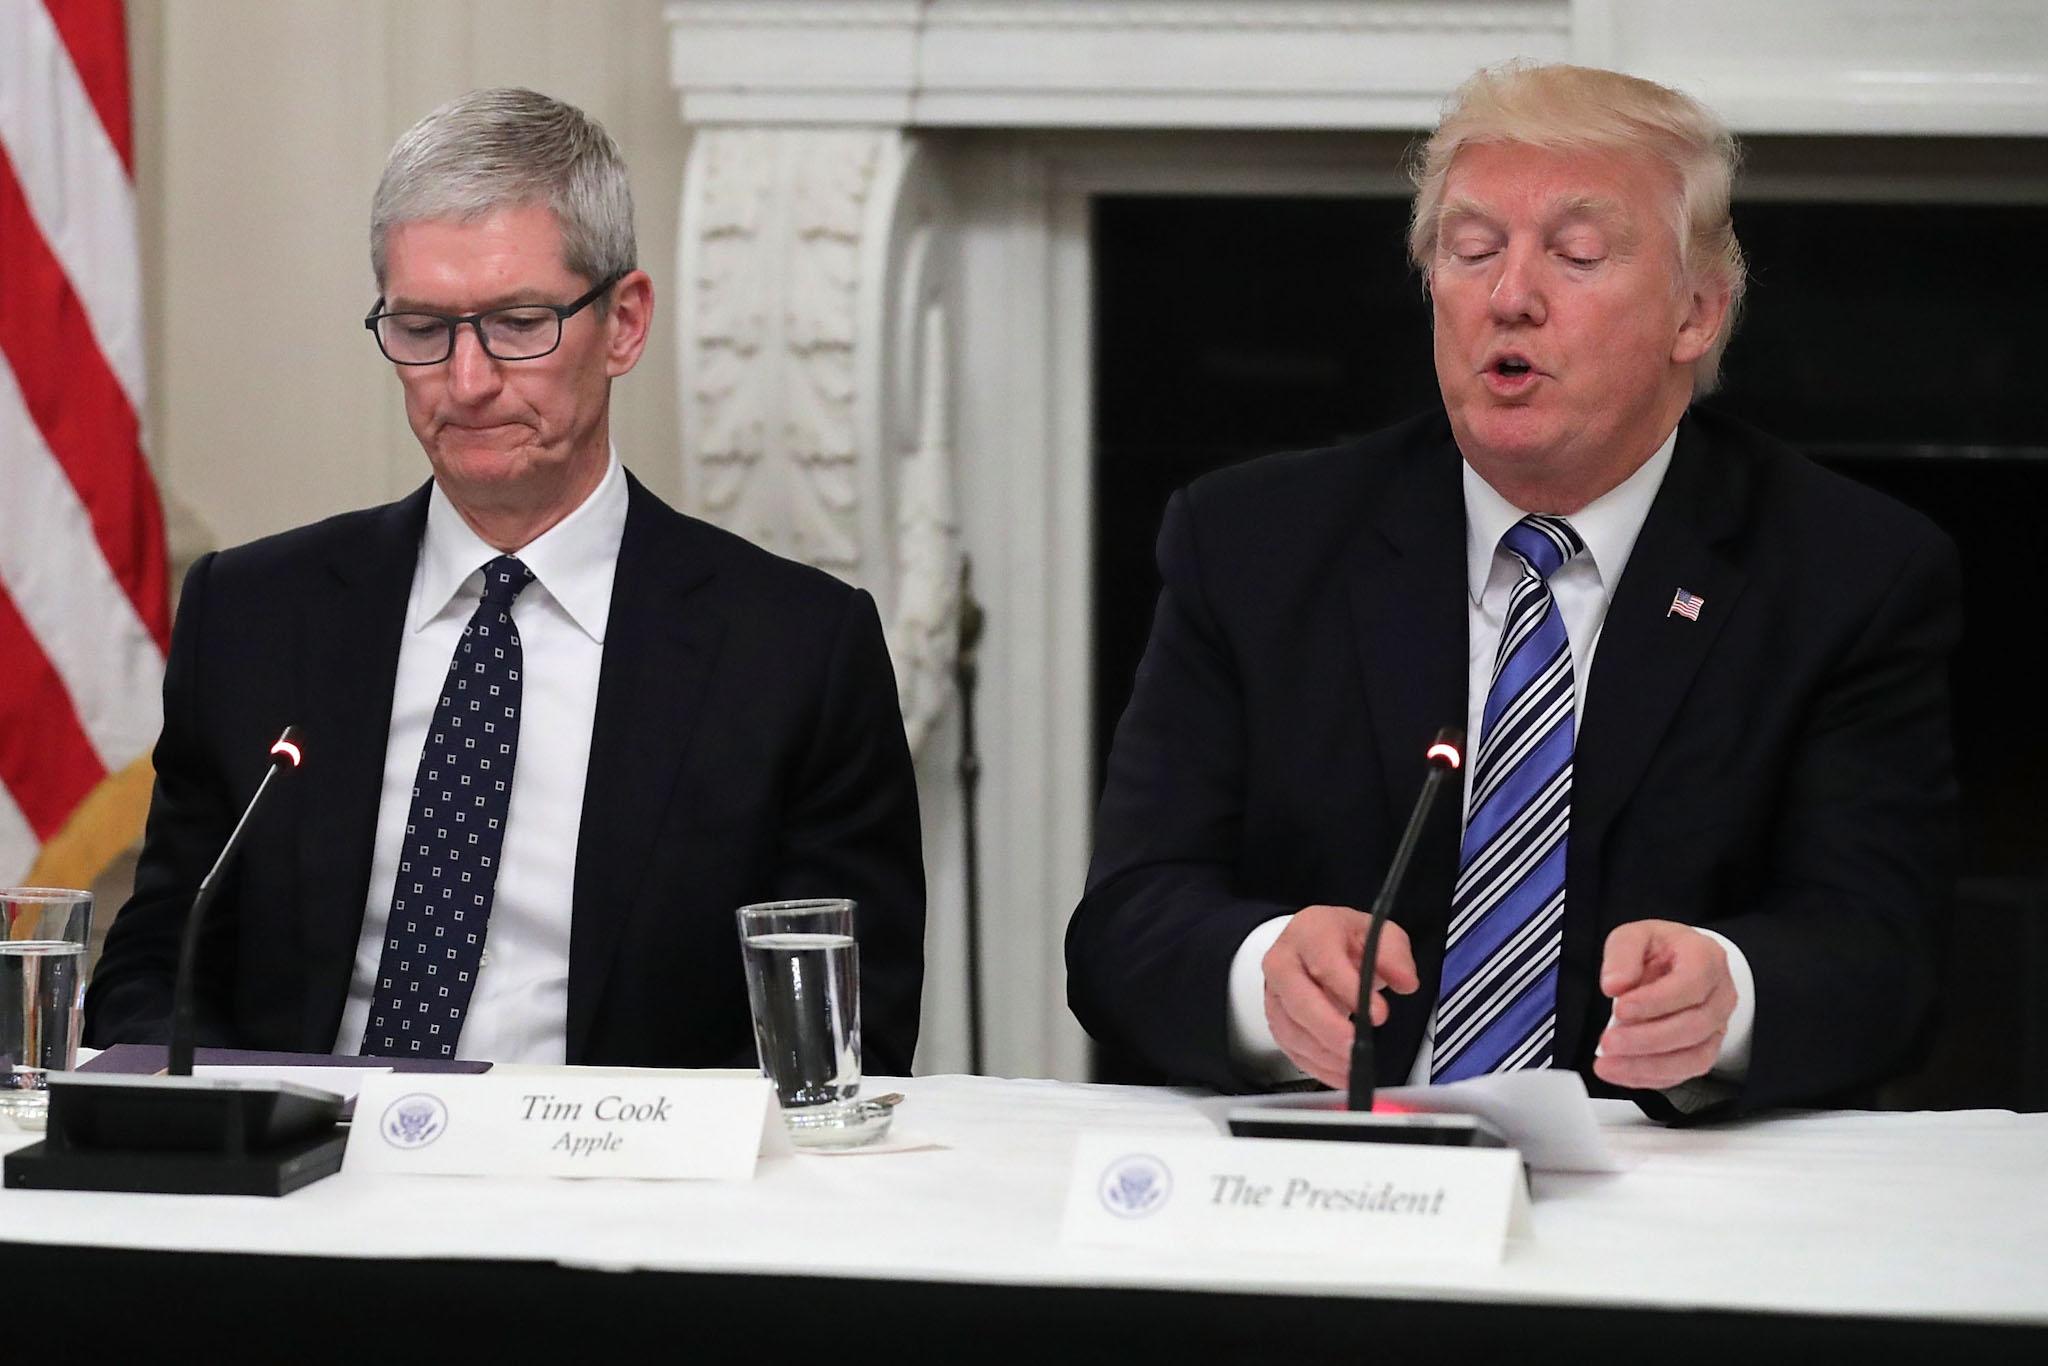 Apple CEO Tim Cook listens to US President Donald Trump deliver opening remarks during a meeting of the American Technology Council